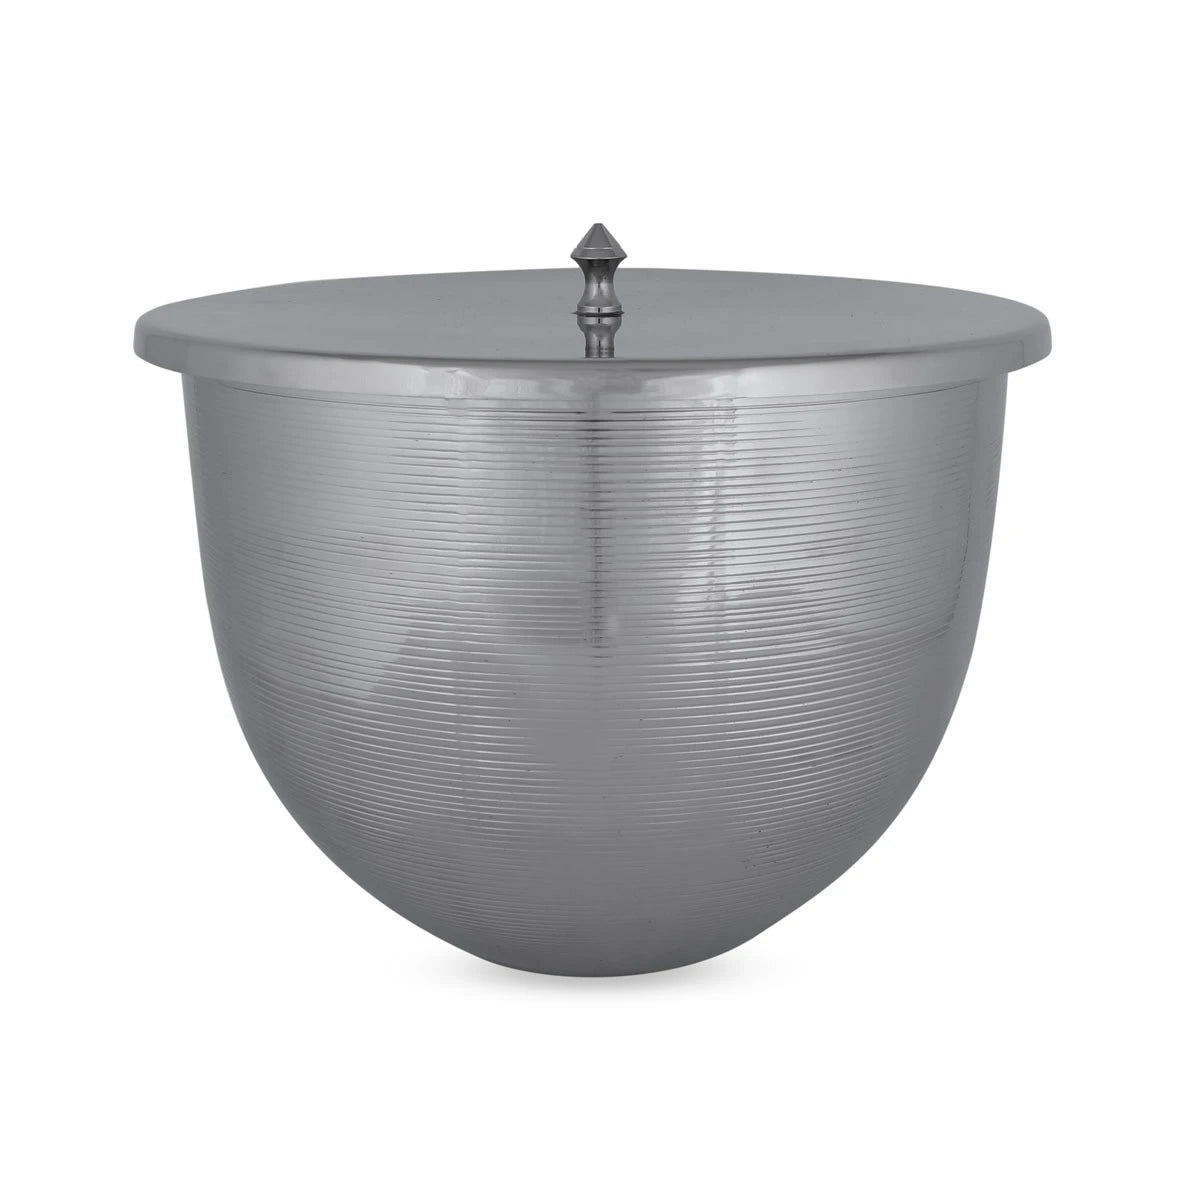 Front View of Glossy Silver Color Streaked Brass Waste Bin